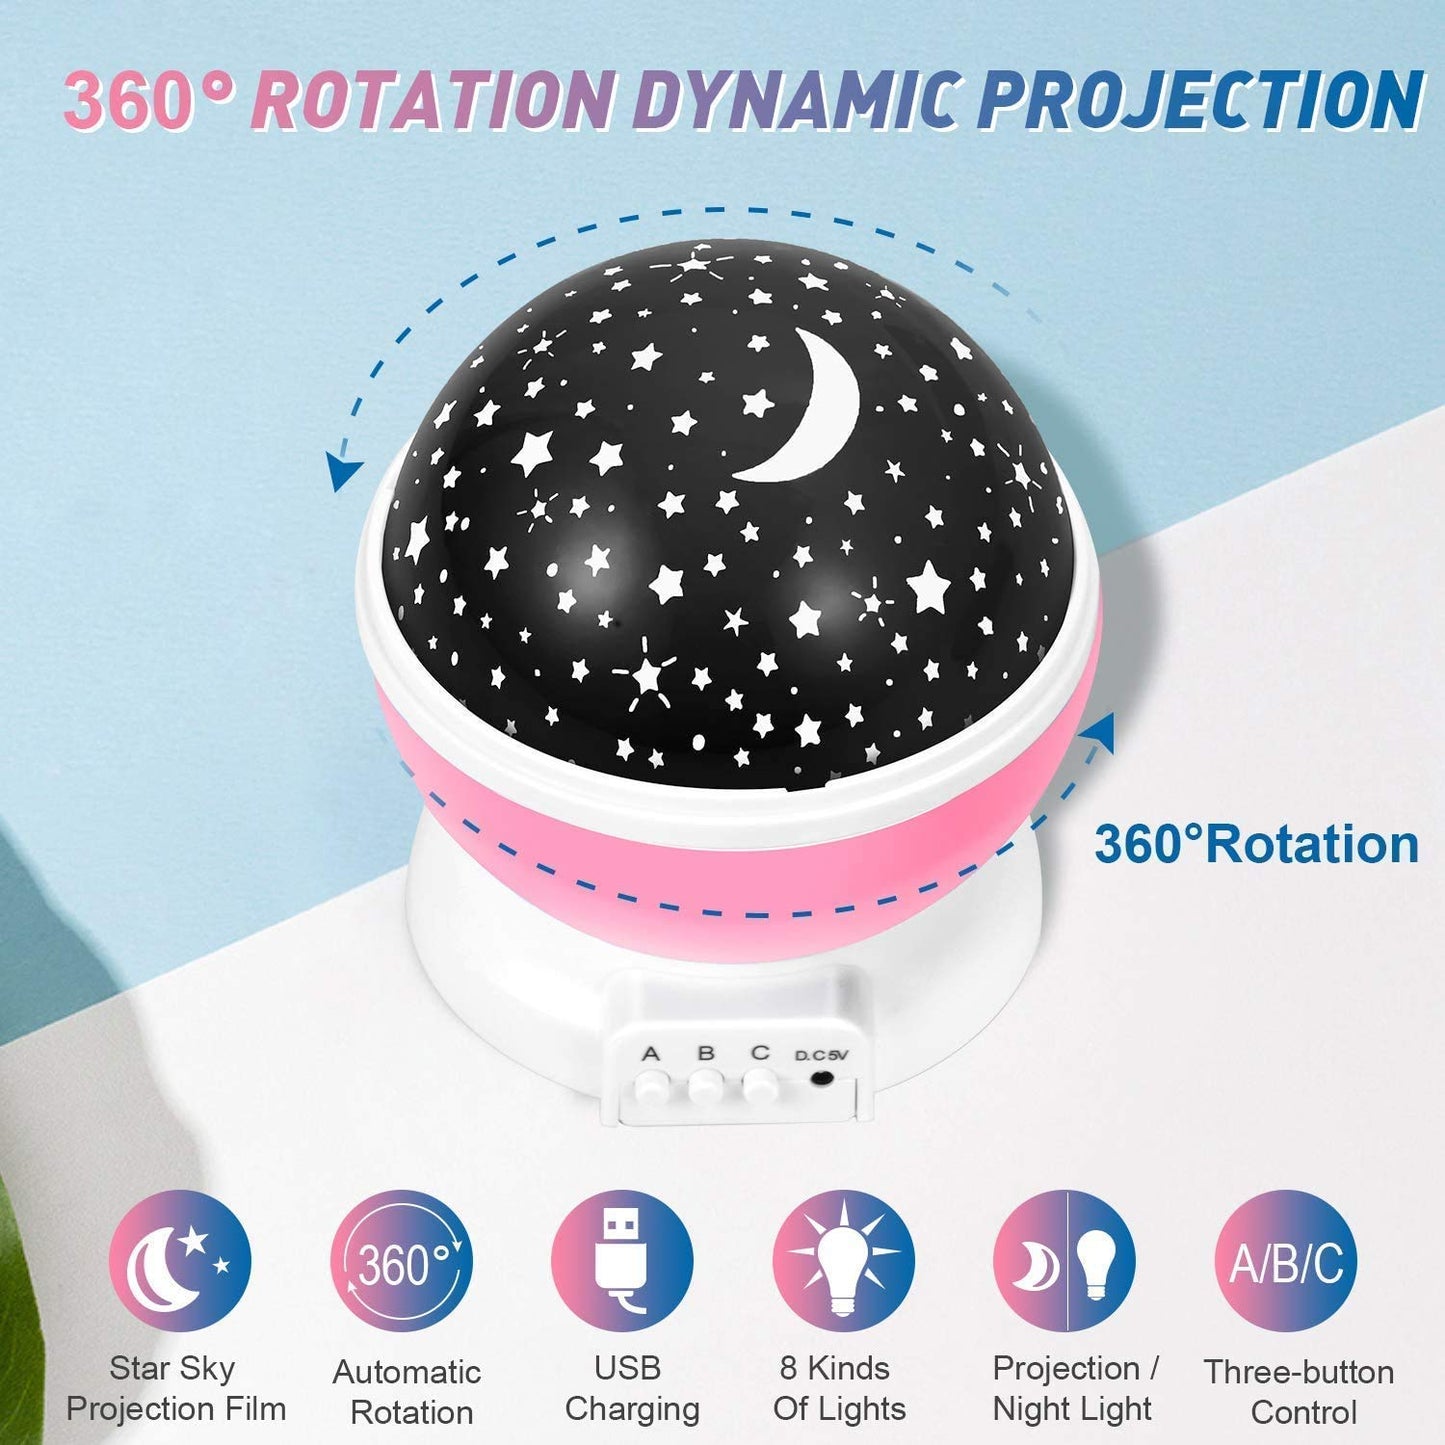 LED Star Light Cosmos Projector Galaxy Night Lamp, Kids Room Lights, Star Master Dream Rotating Projector Lamp for Bedroom, Decoration, 360 Degree Rotating Moon Sky Romantic Gifts